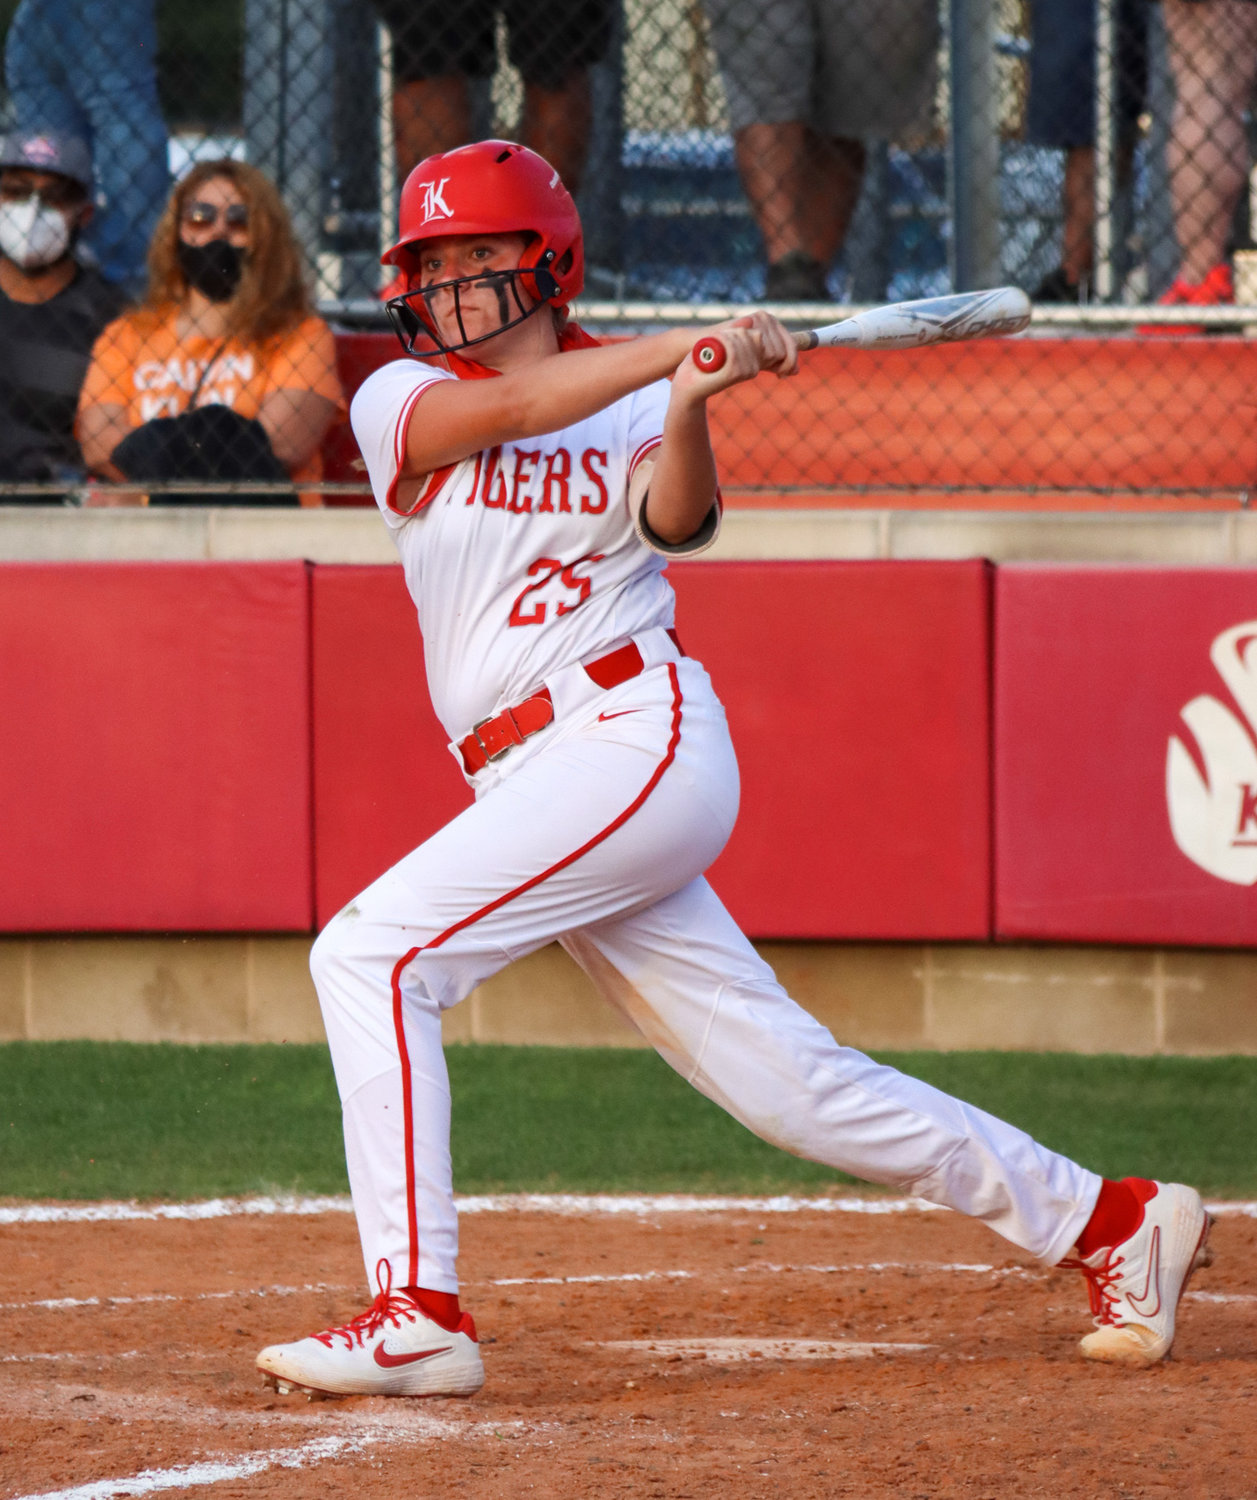 Katy High freshman Cameryn Harrison looks on after taking a swing during Game 1 of the team’s area playoff series against Houston Heights on Friday, May 7, at Katy High.